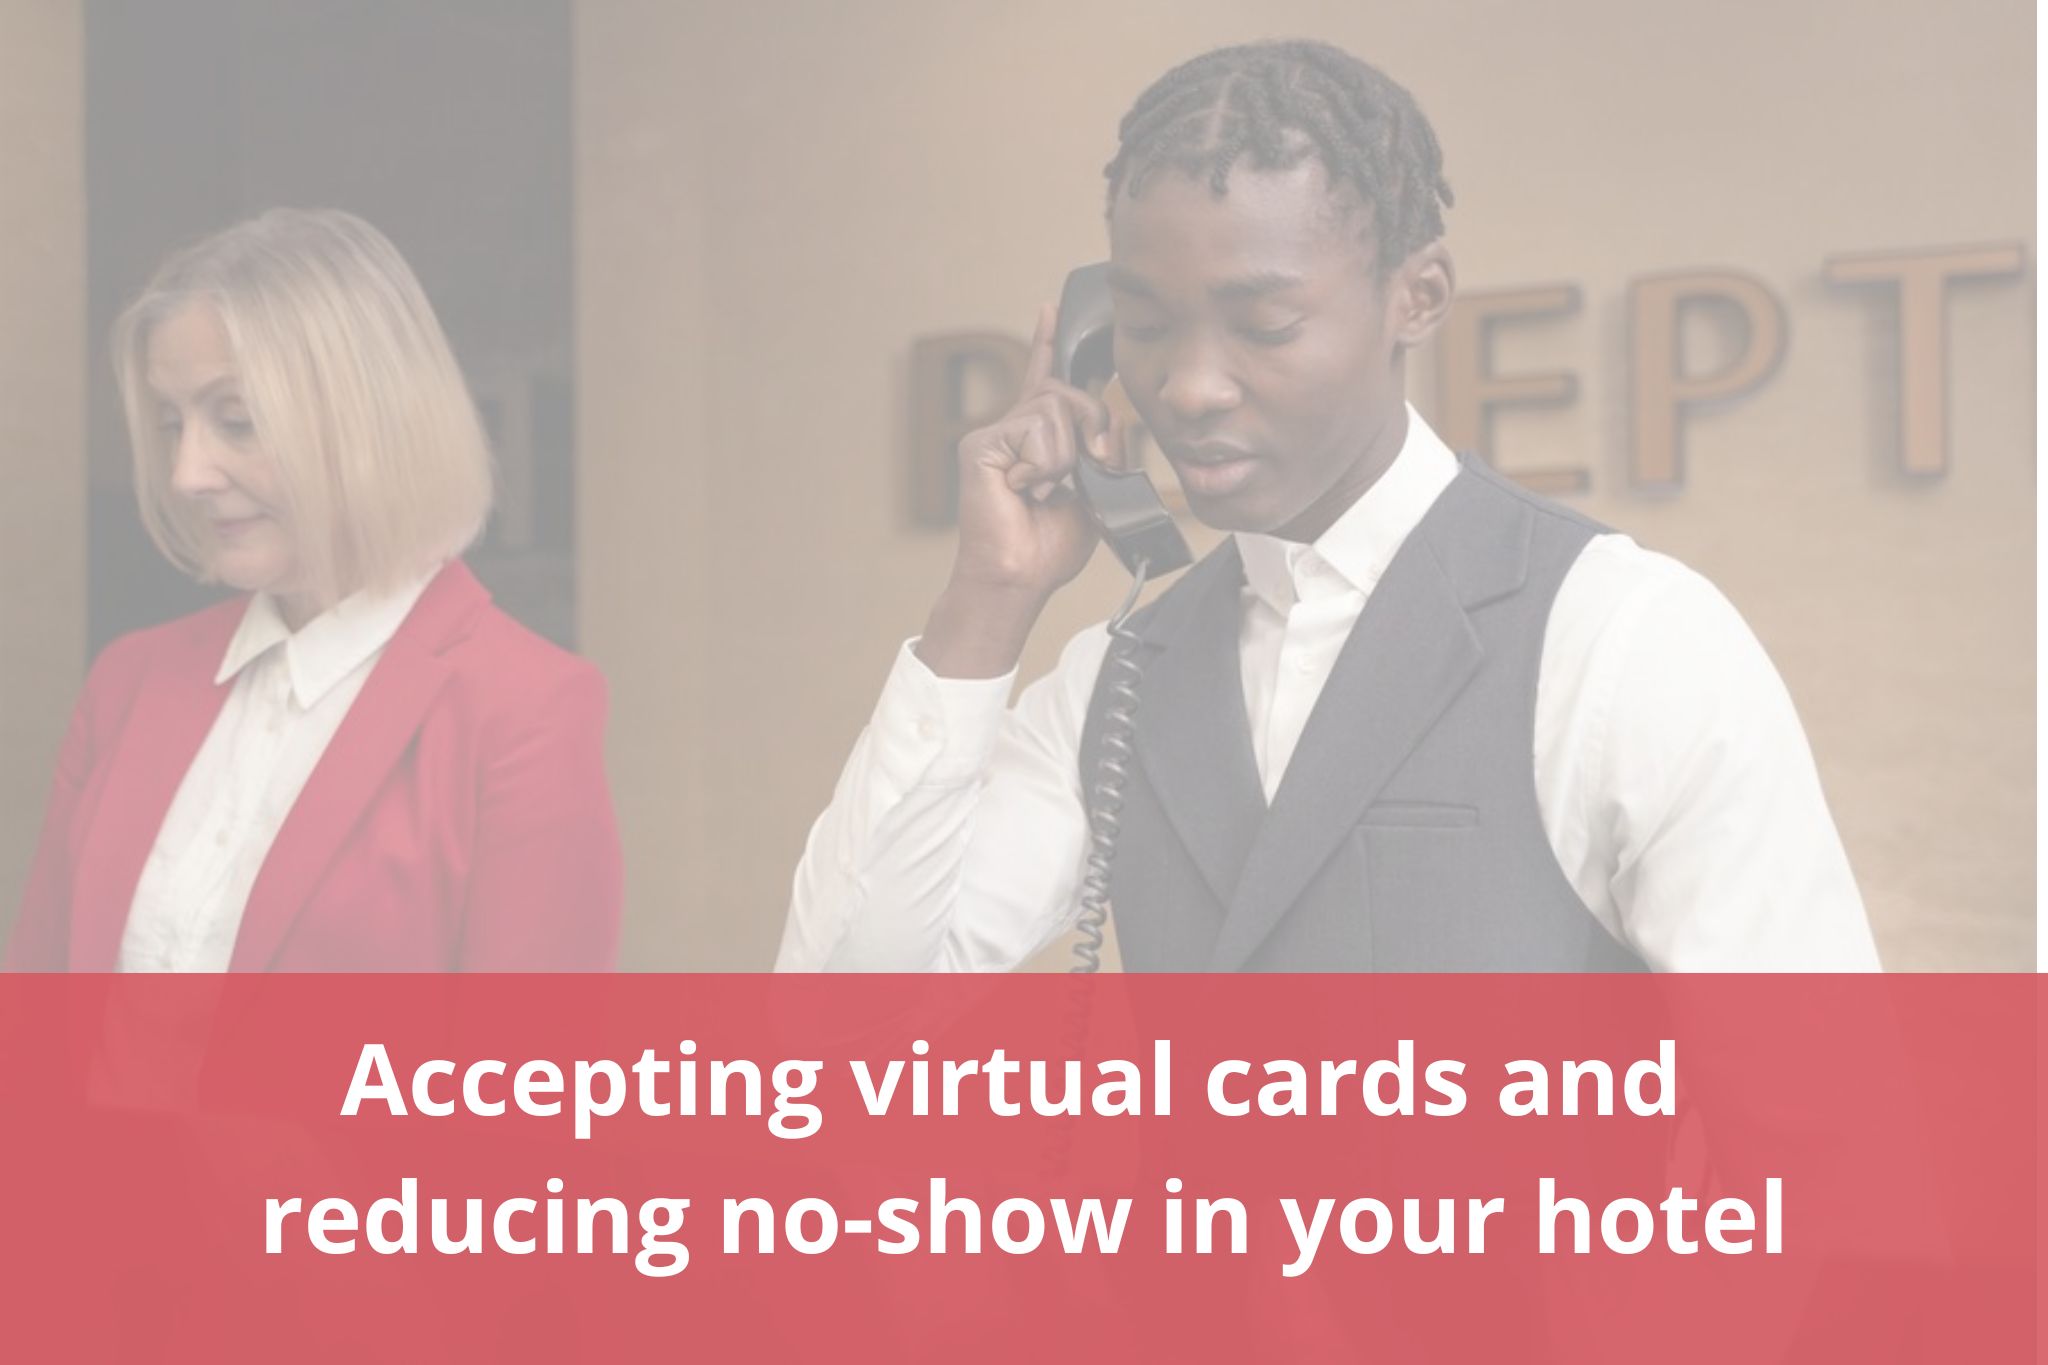 cashpay-hotel-reducing-noshow-accepting-virtual-cards